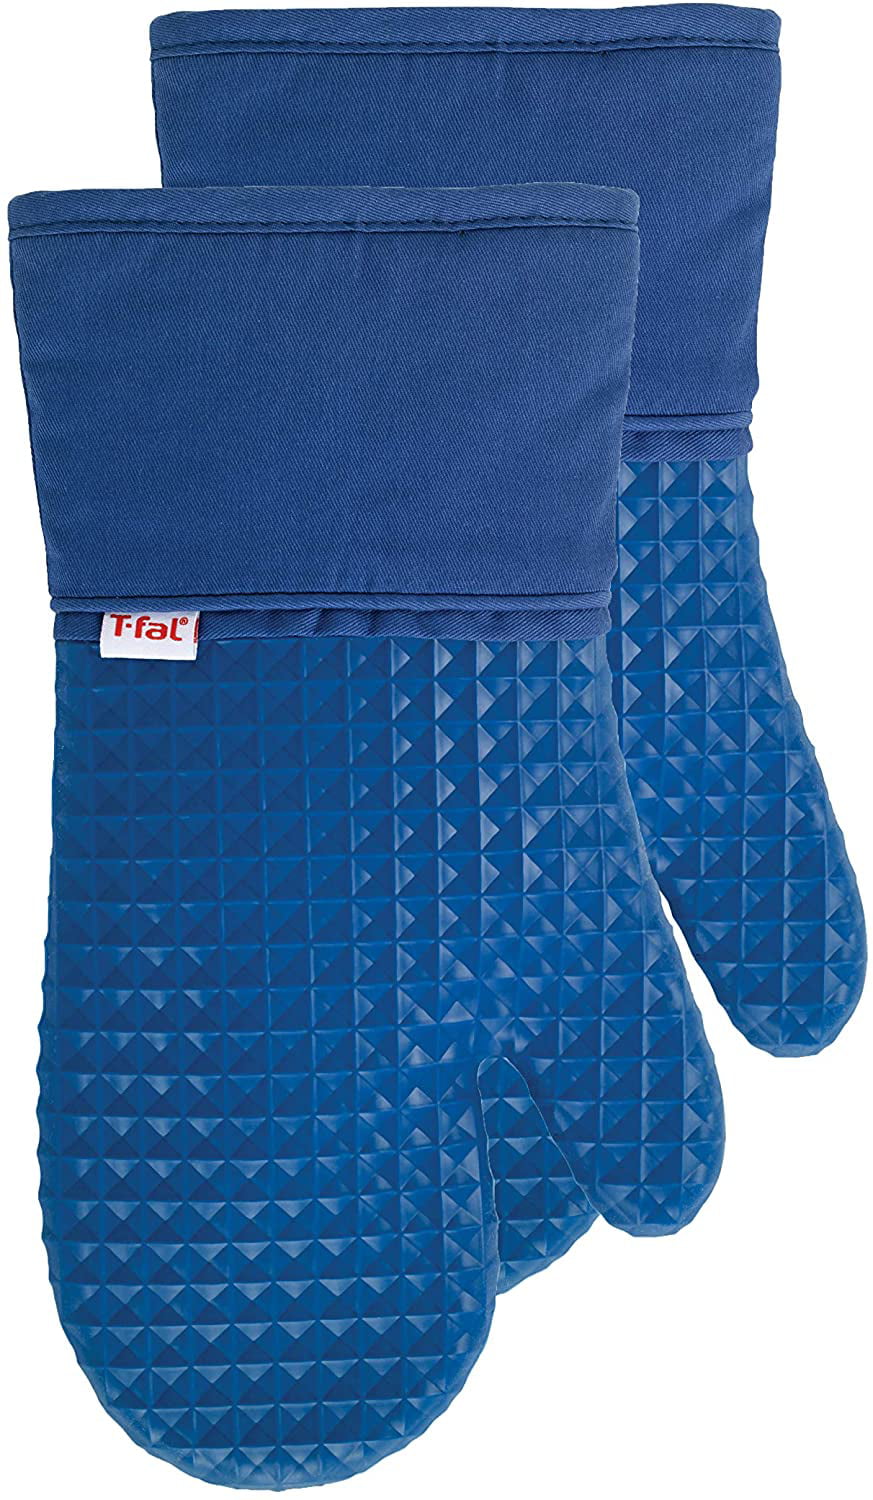 NEW Better Homes & Gardens 2 Pack Mitts-Silicone Grip-Heat resistant up to 500°F 